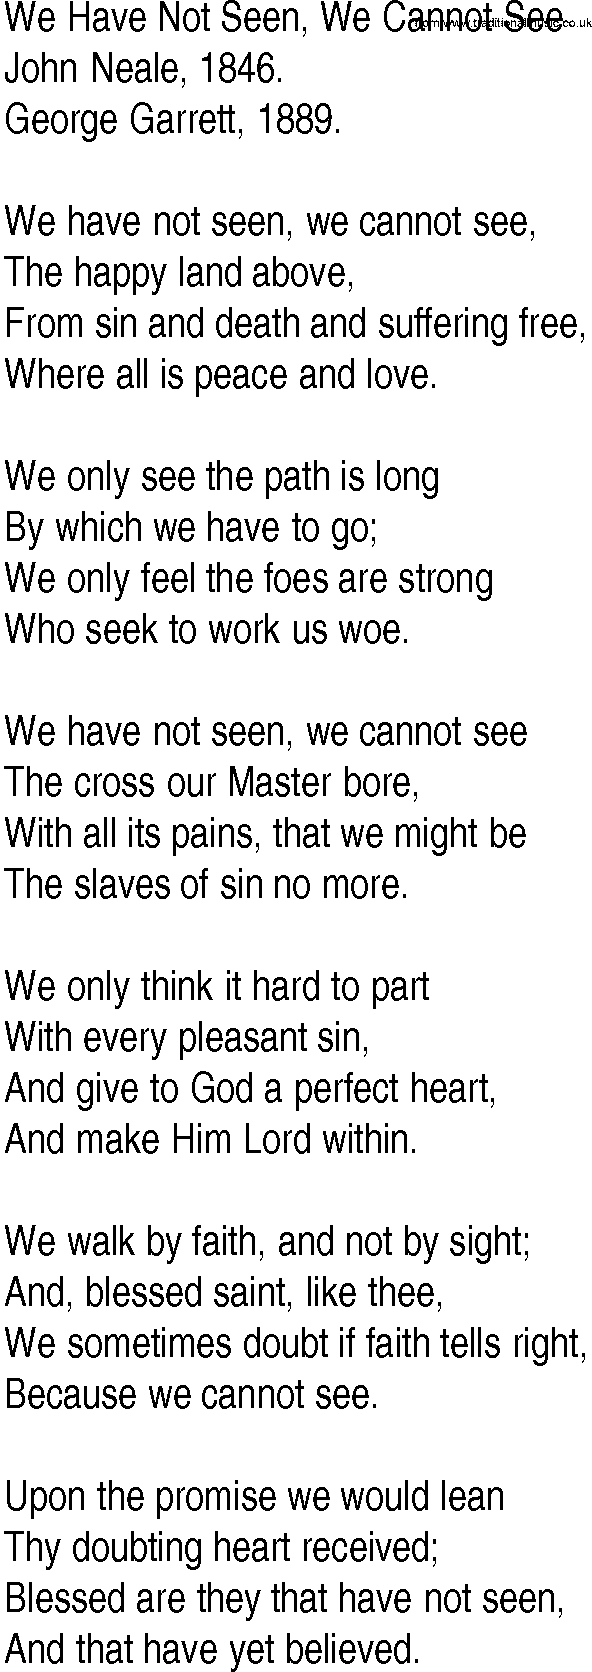 Hymn and Gospel Song: We Have Not Seen, We Cannot See by John Neale lyrics